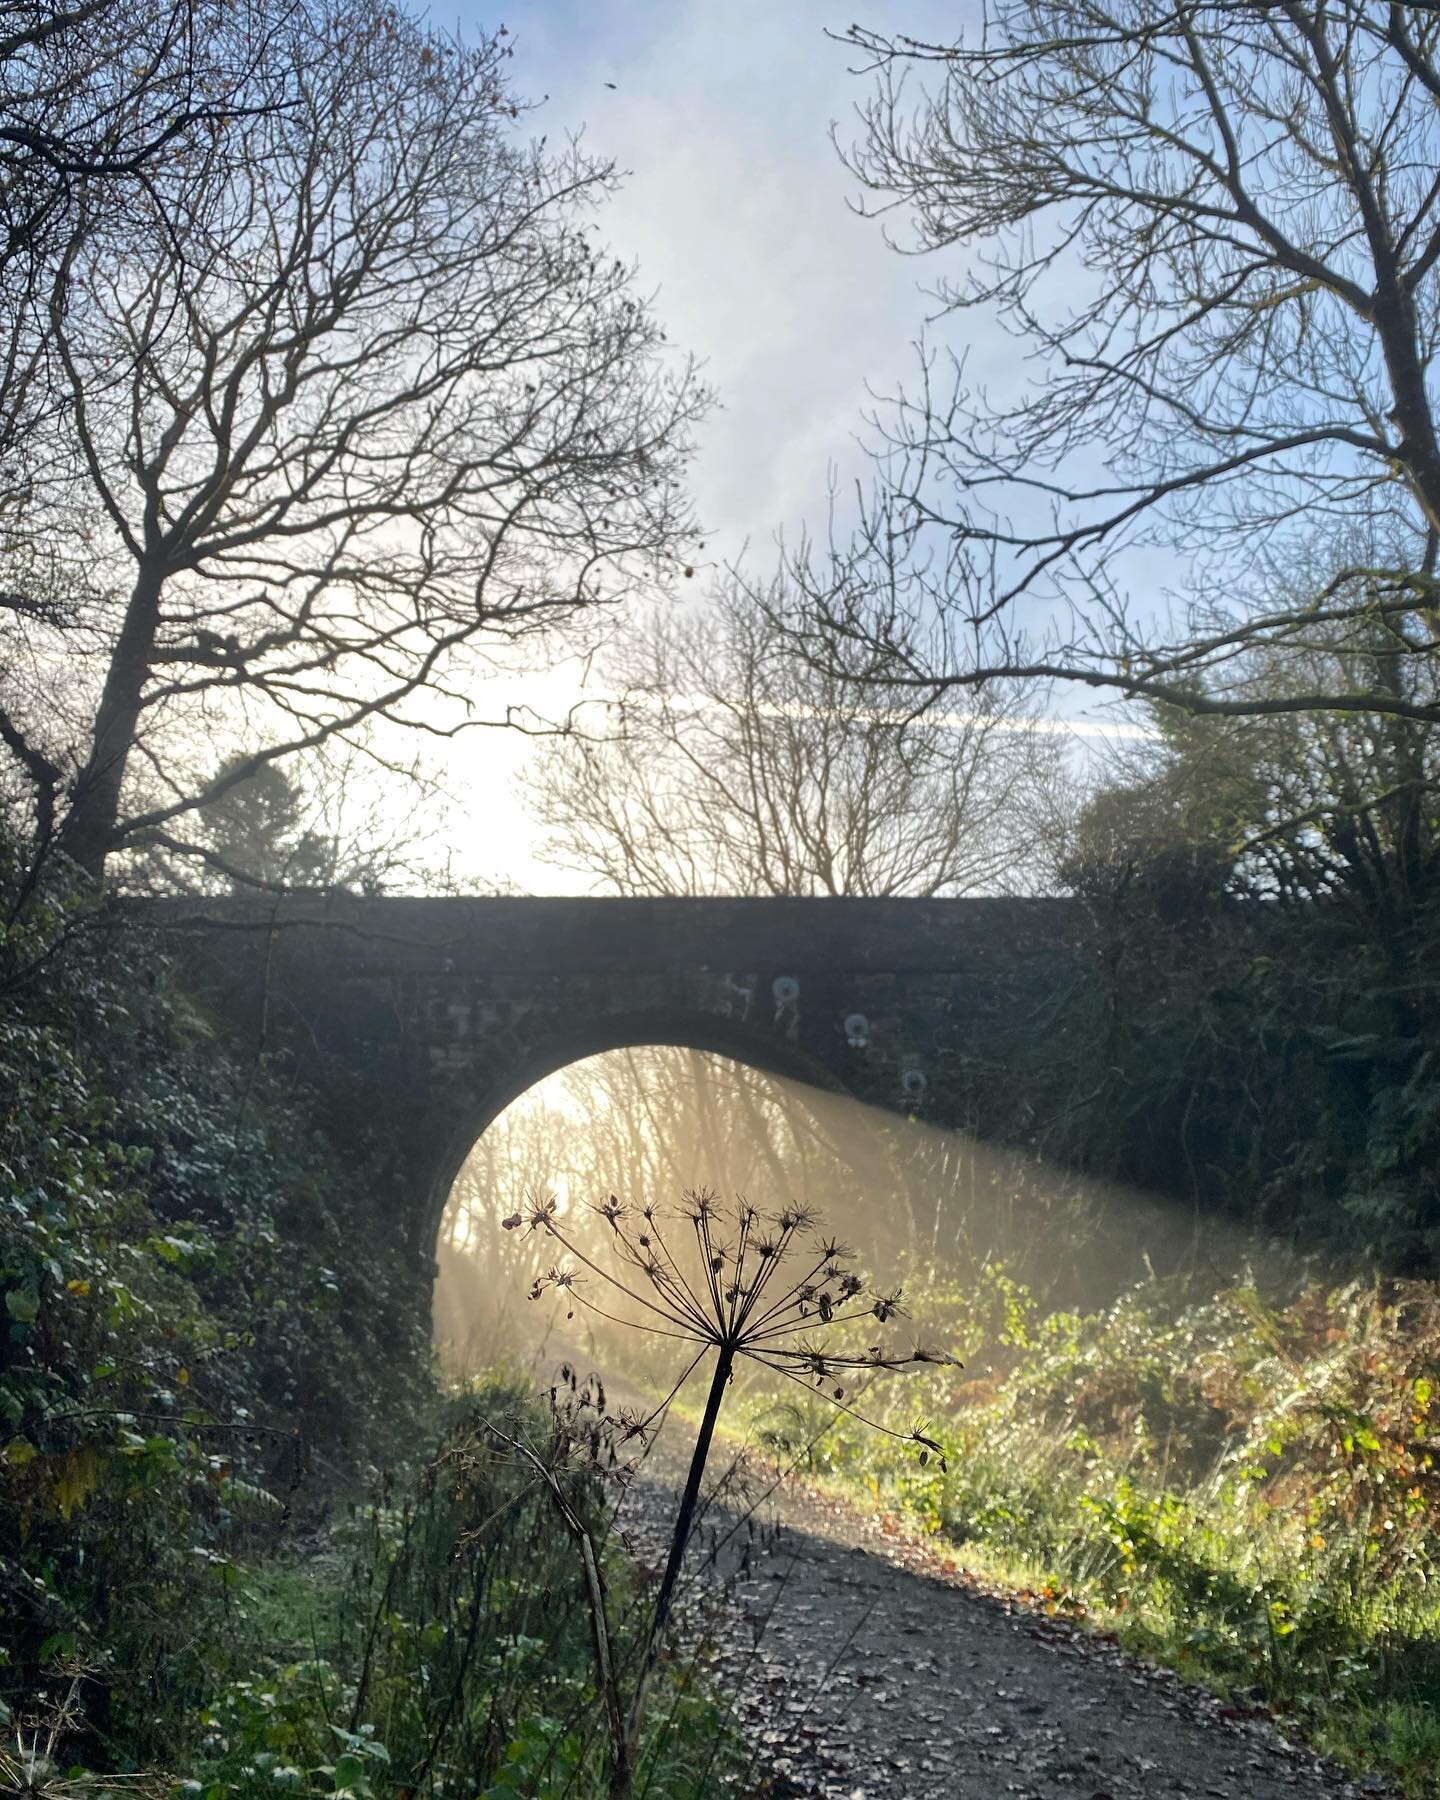 The glorious misty morning light stopped us in our tracks on our run this weekend.